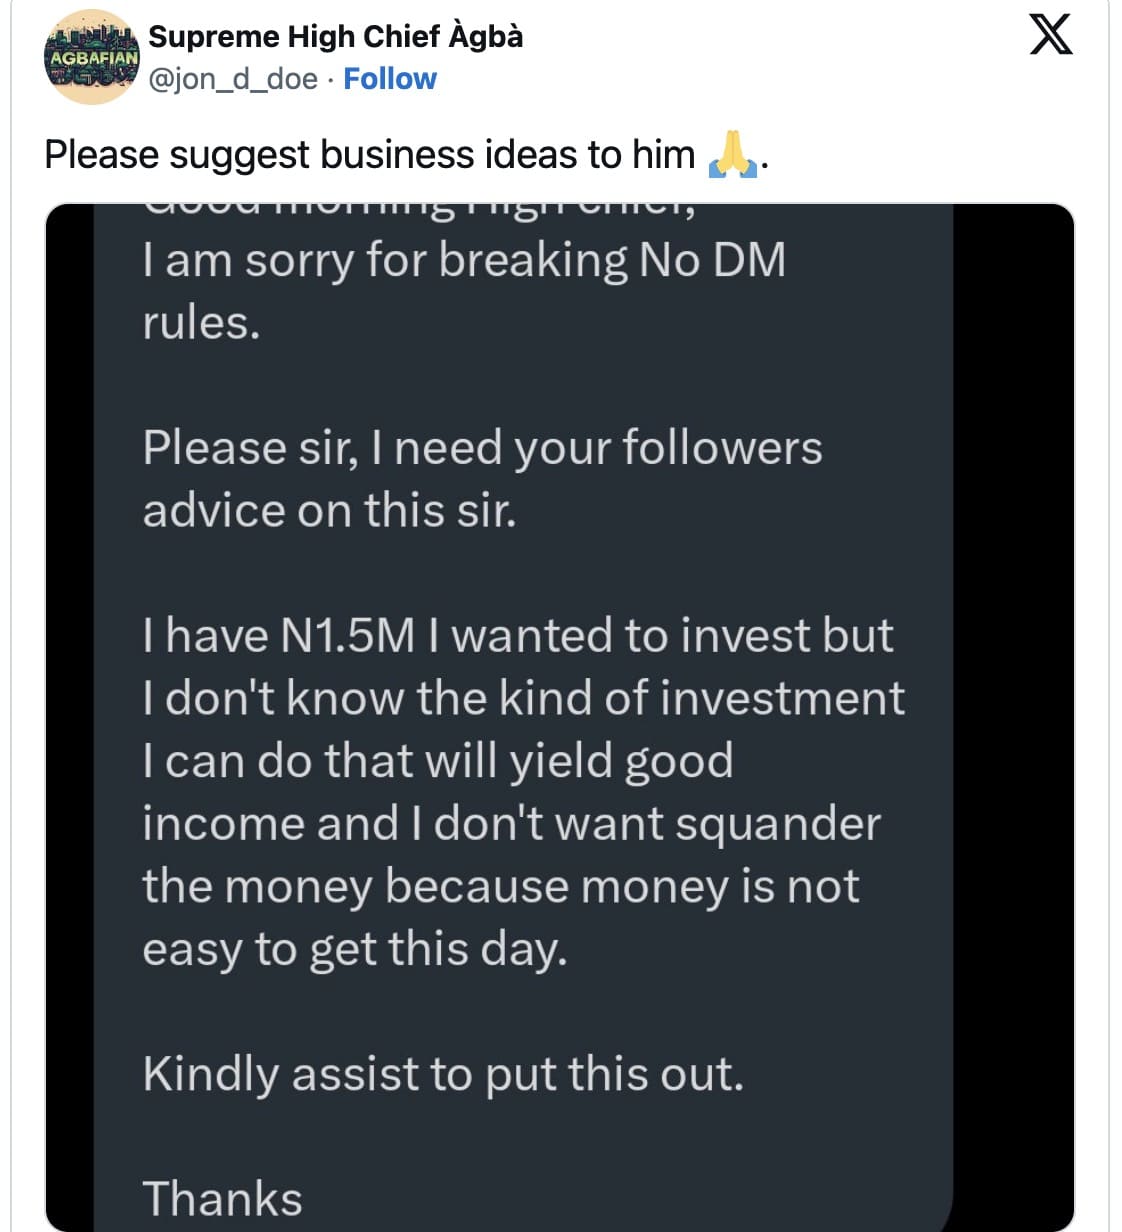 Nigerian man with N1.5M seeks advice on profitable business ideas to invest on